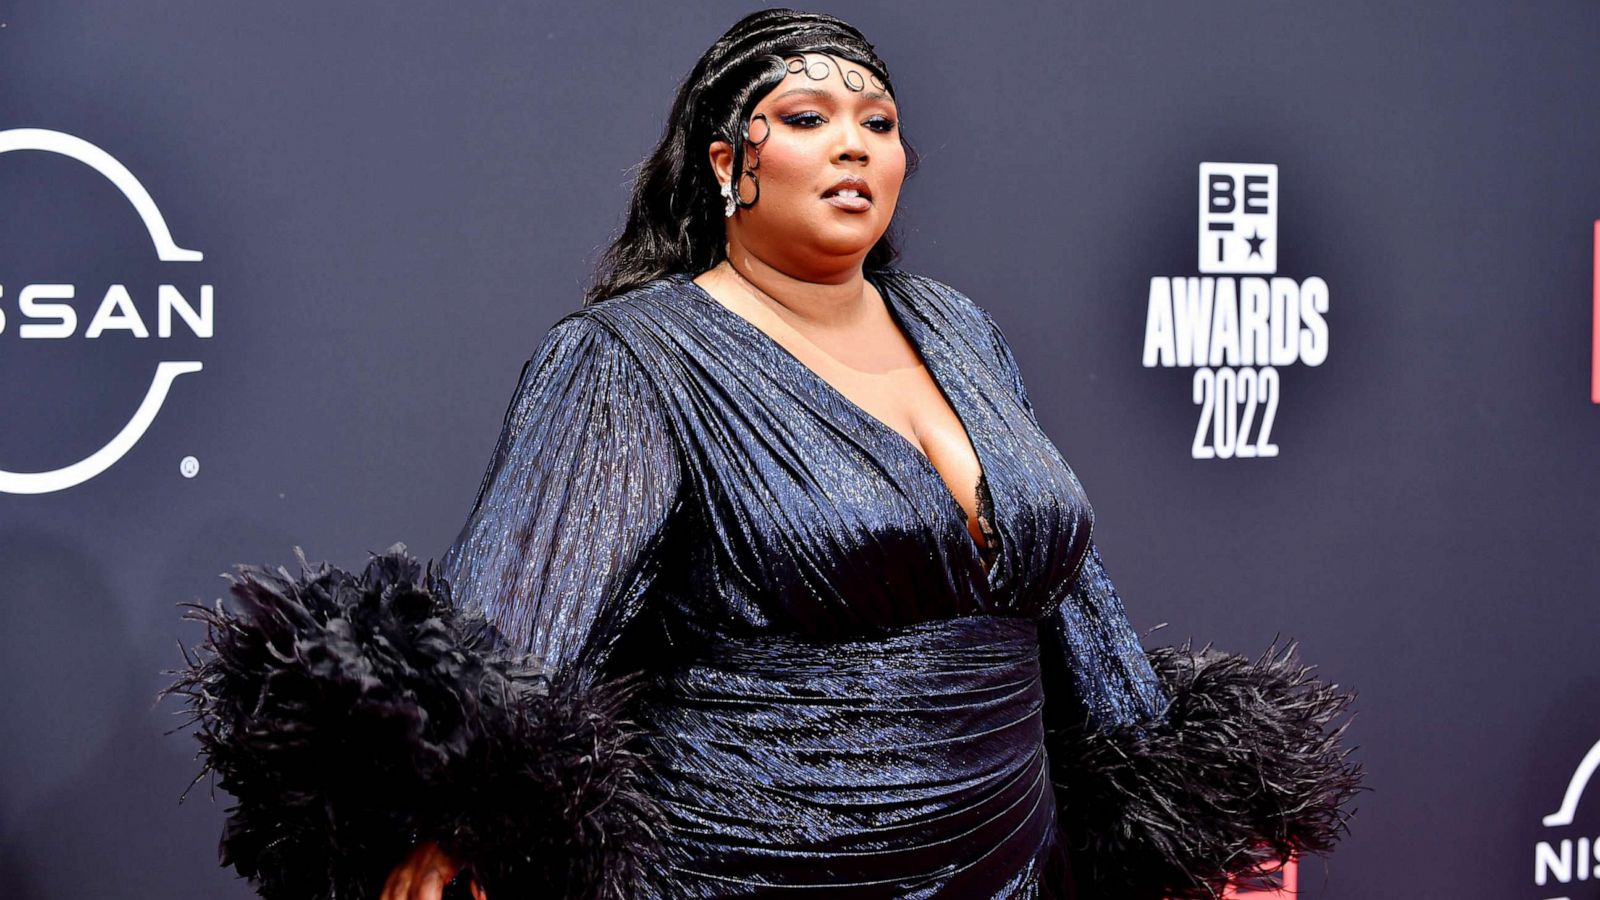 LIZZO NEWS AS A BRAND!! #lizzo #lizzoallegation #lizzoallegations